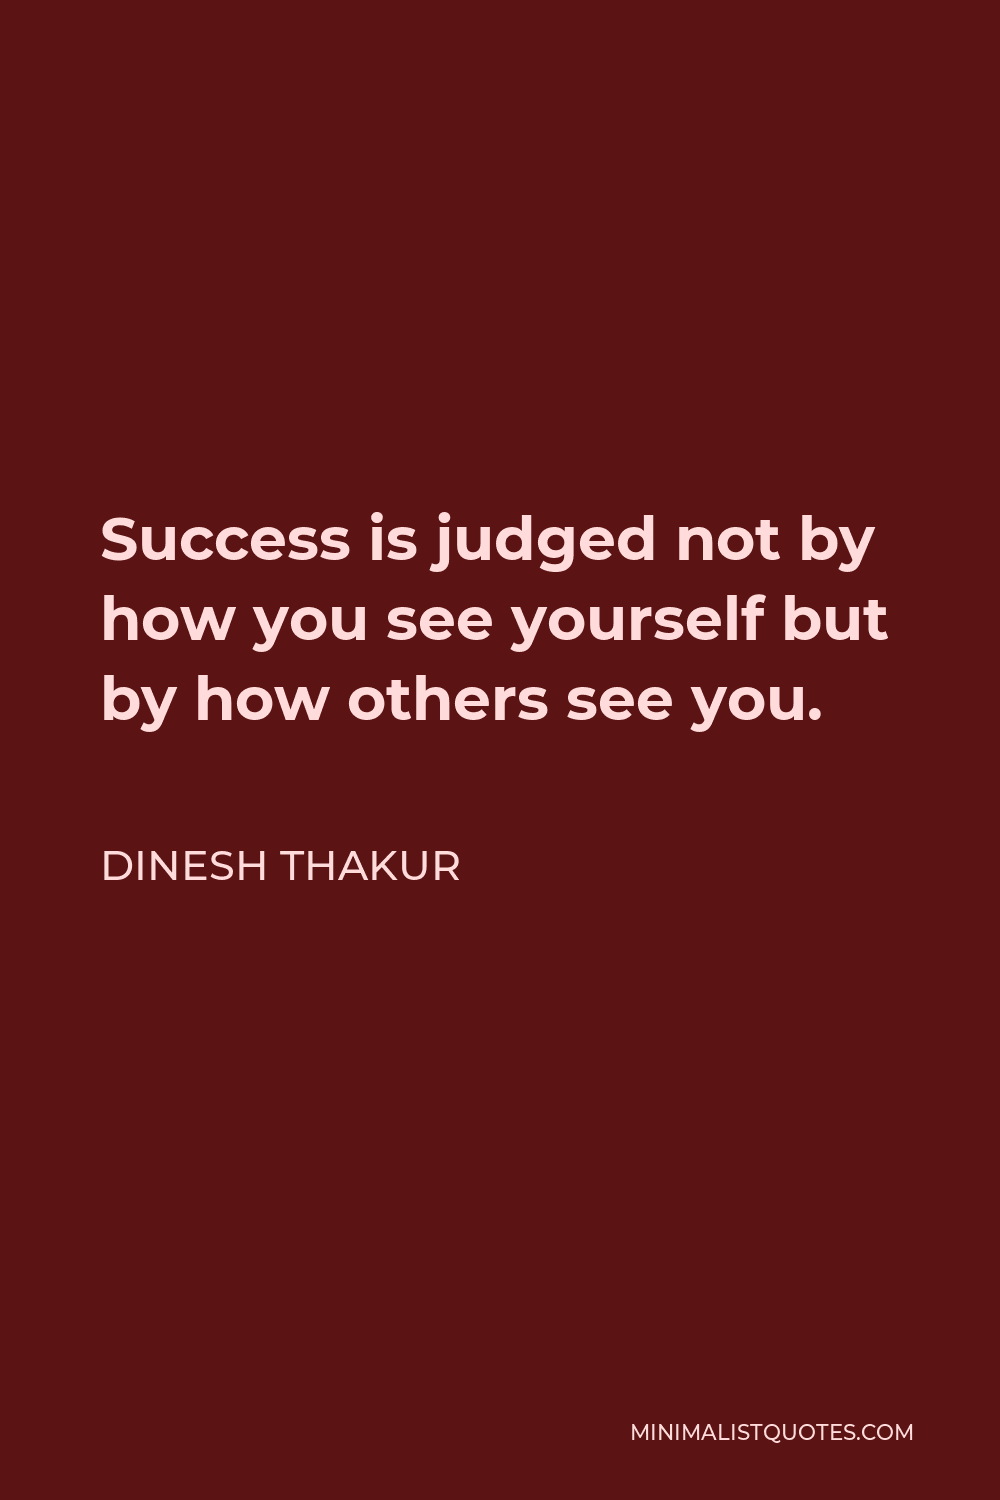 Dinesh Thakur Quote: Success is judged not by how you see yourself but ...